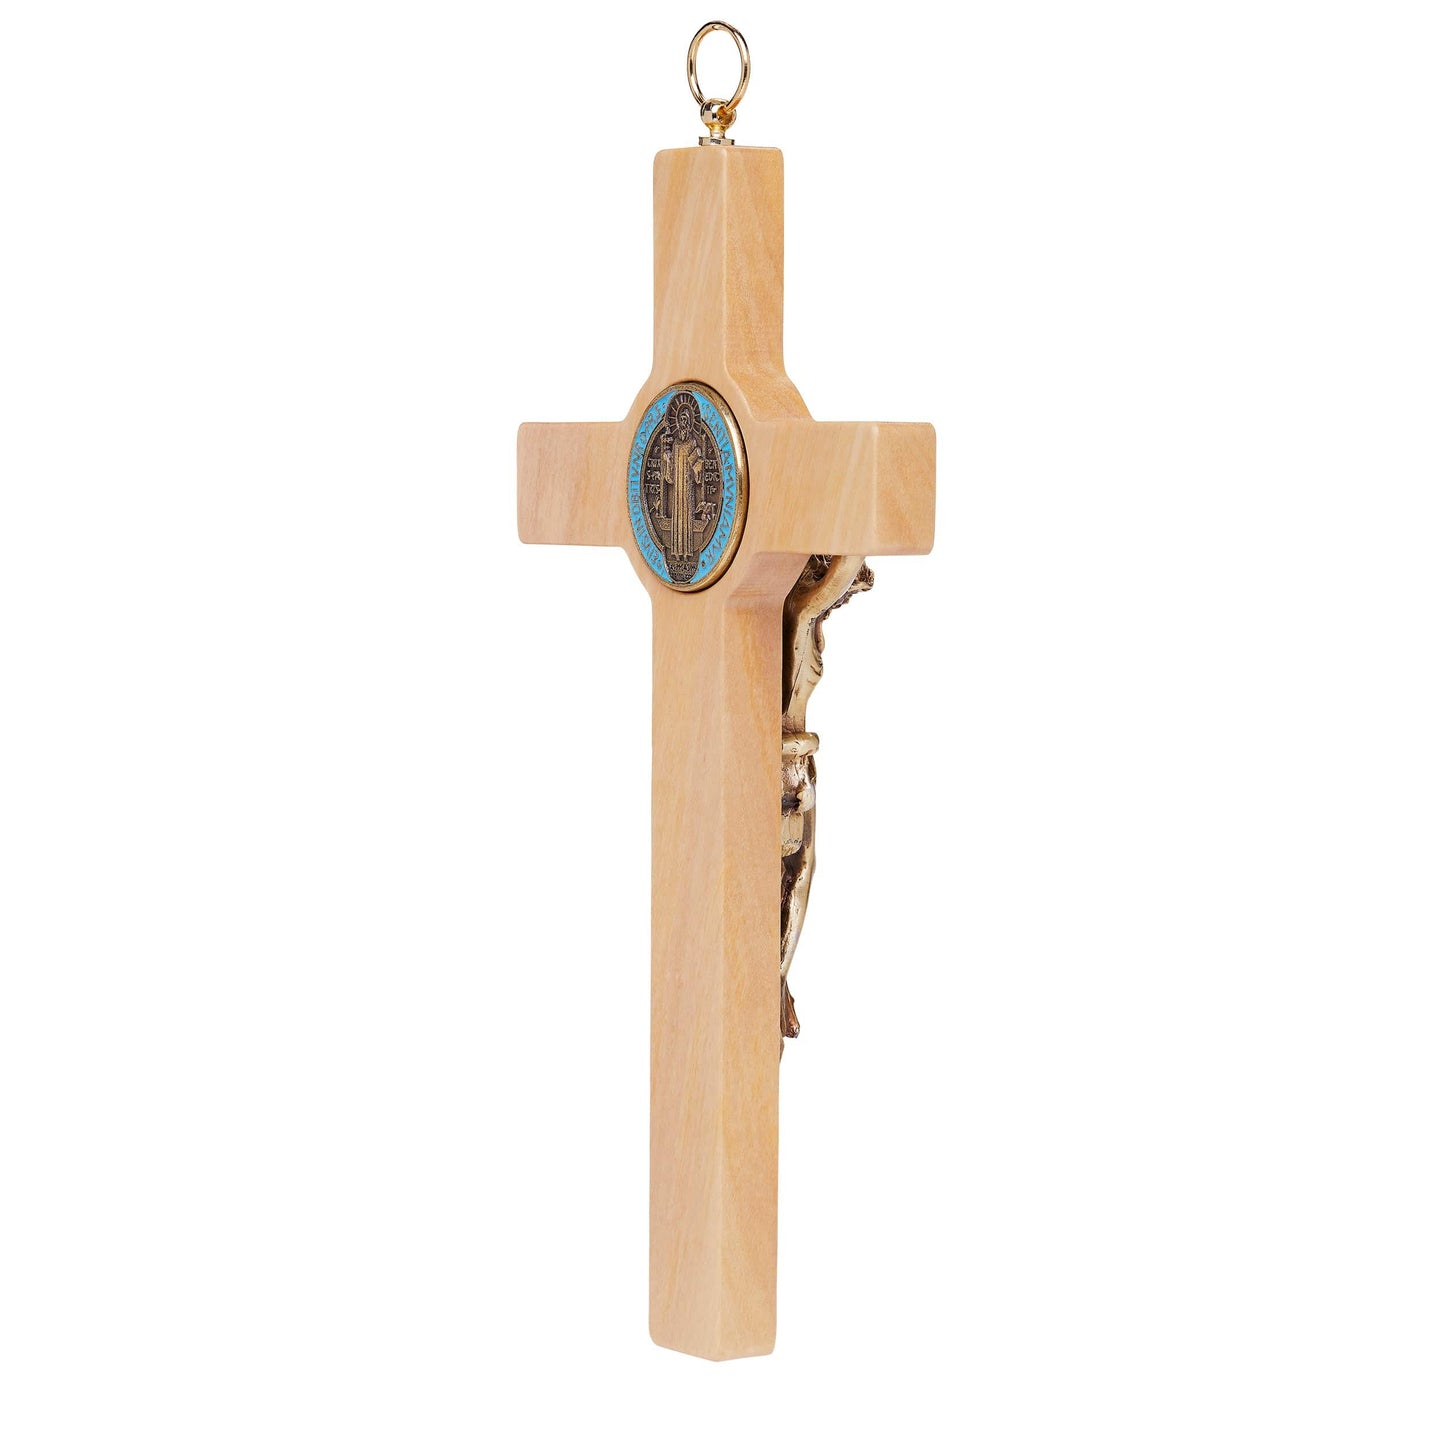 MONDO CATTOLICO 20 cm (7.85 in) Beech Wood St. Benedict Crucifix With Colored Enameled Medal and Light Outline